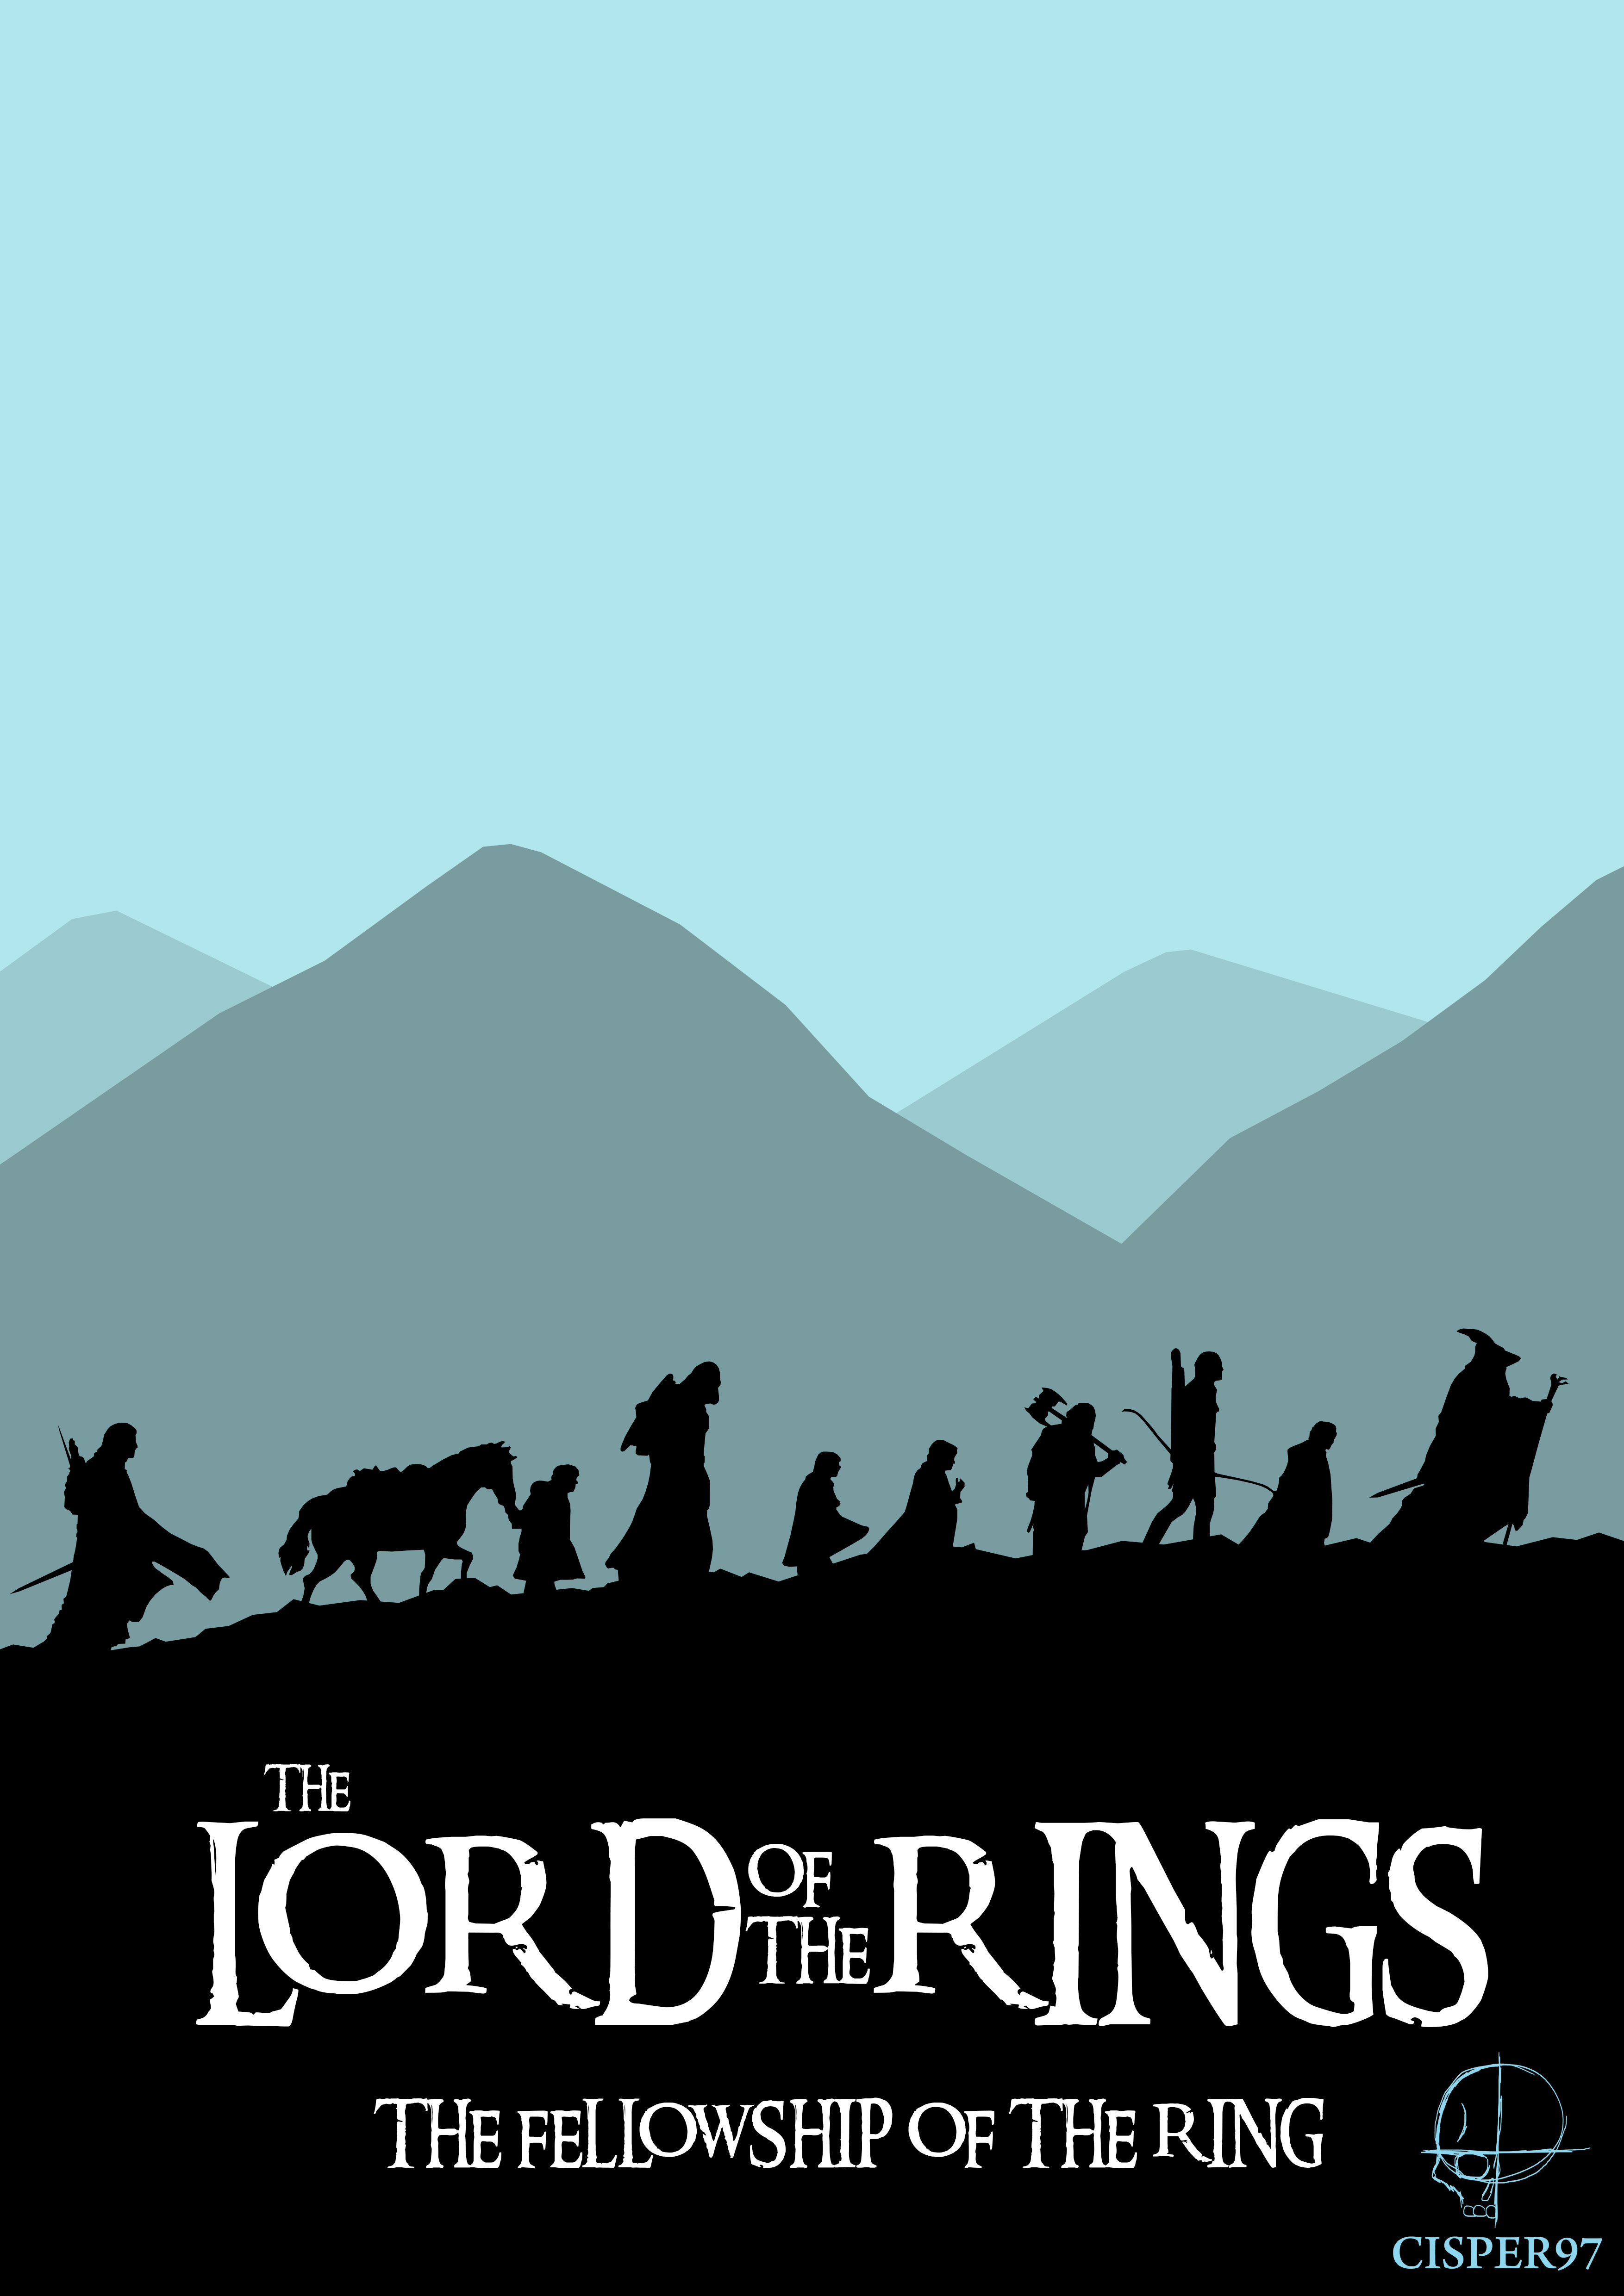 Fabel vergeven Boom The Lord of the Rings the fellowship of the ring by Cisper97 on DeviantArt